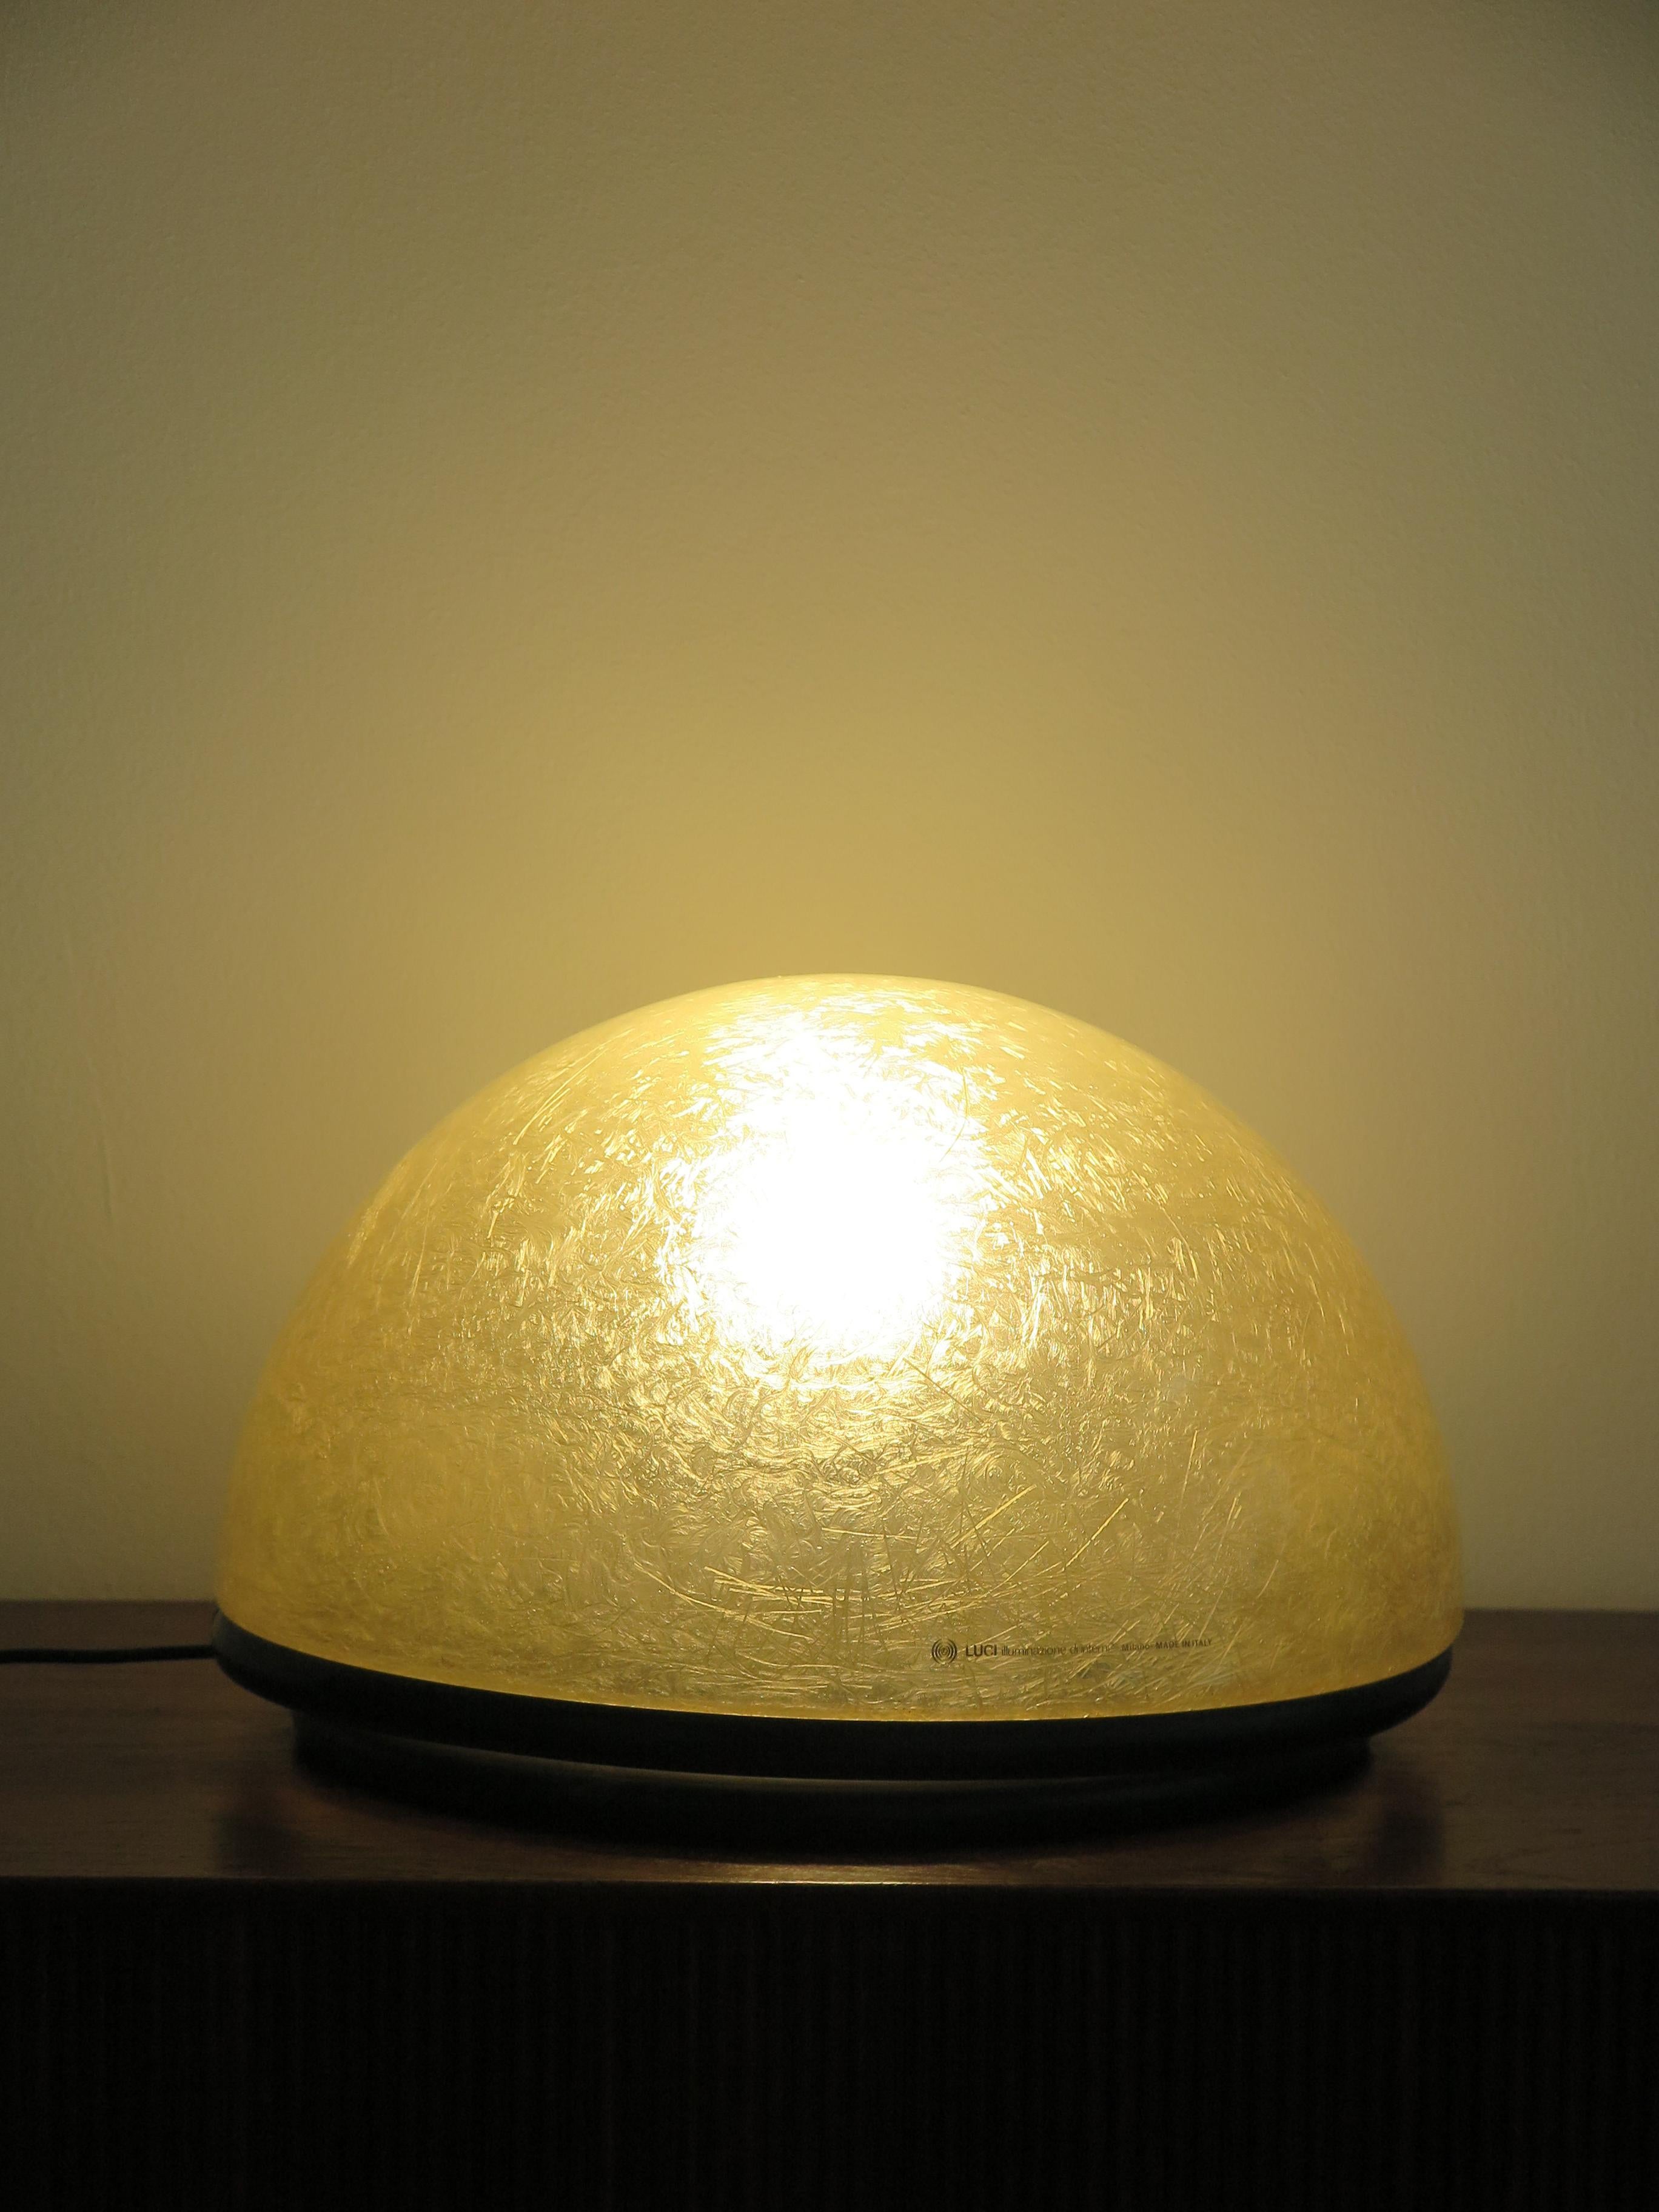 Italian Mid-Century Modern design table lamp designed by Lumi for Luci Illuminazione d’Interni Milano with fiberglass diffuser and metal and rubber base, manufacturer’s adhesive label, Italy 1960s
Please note that the lamp is original of the period